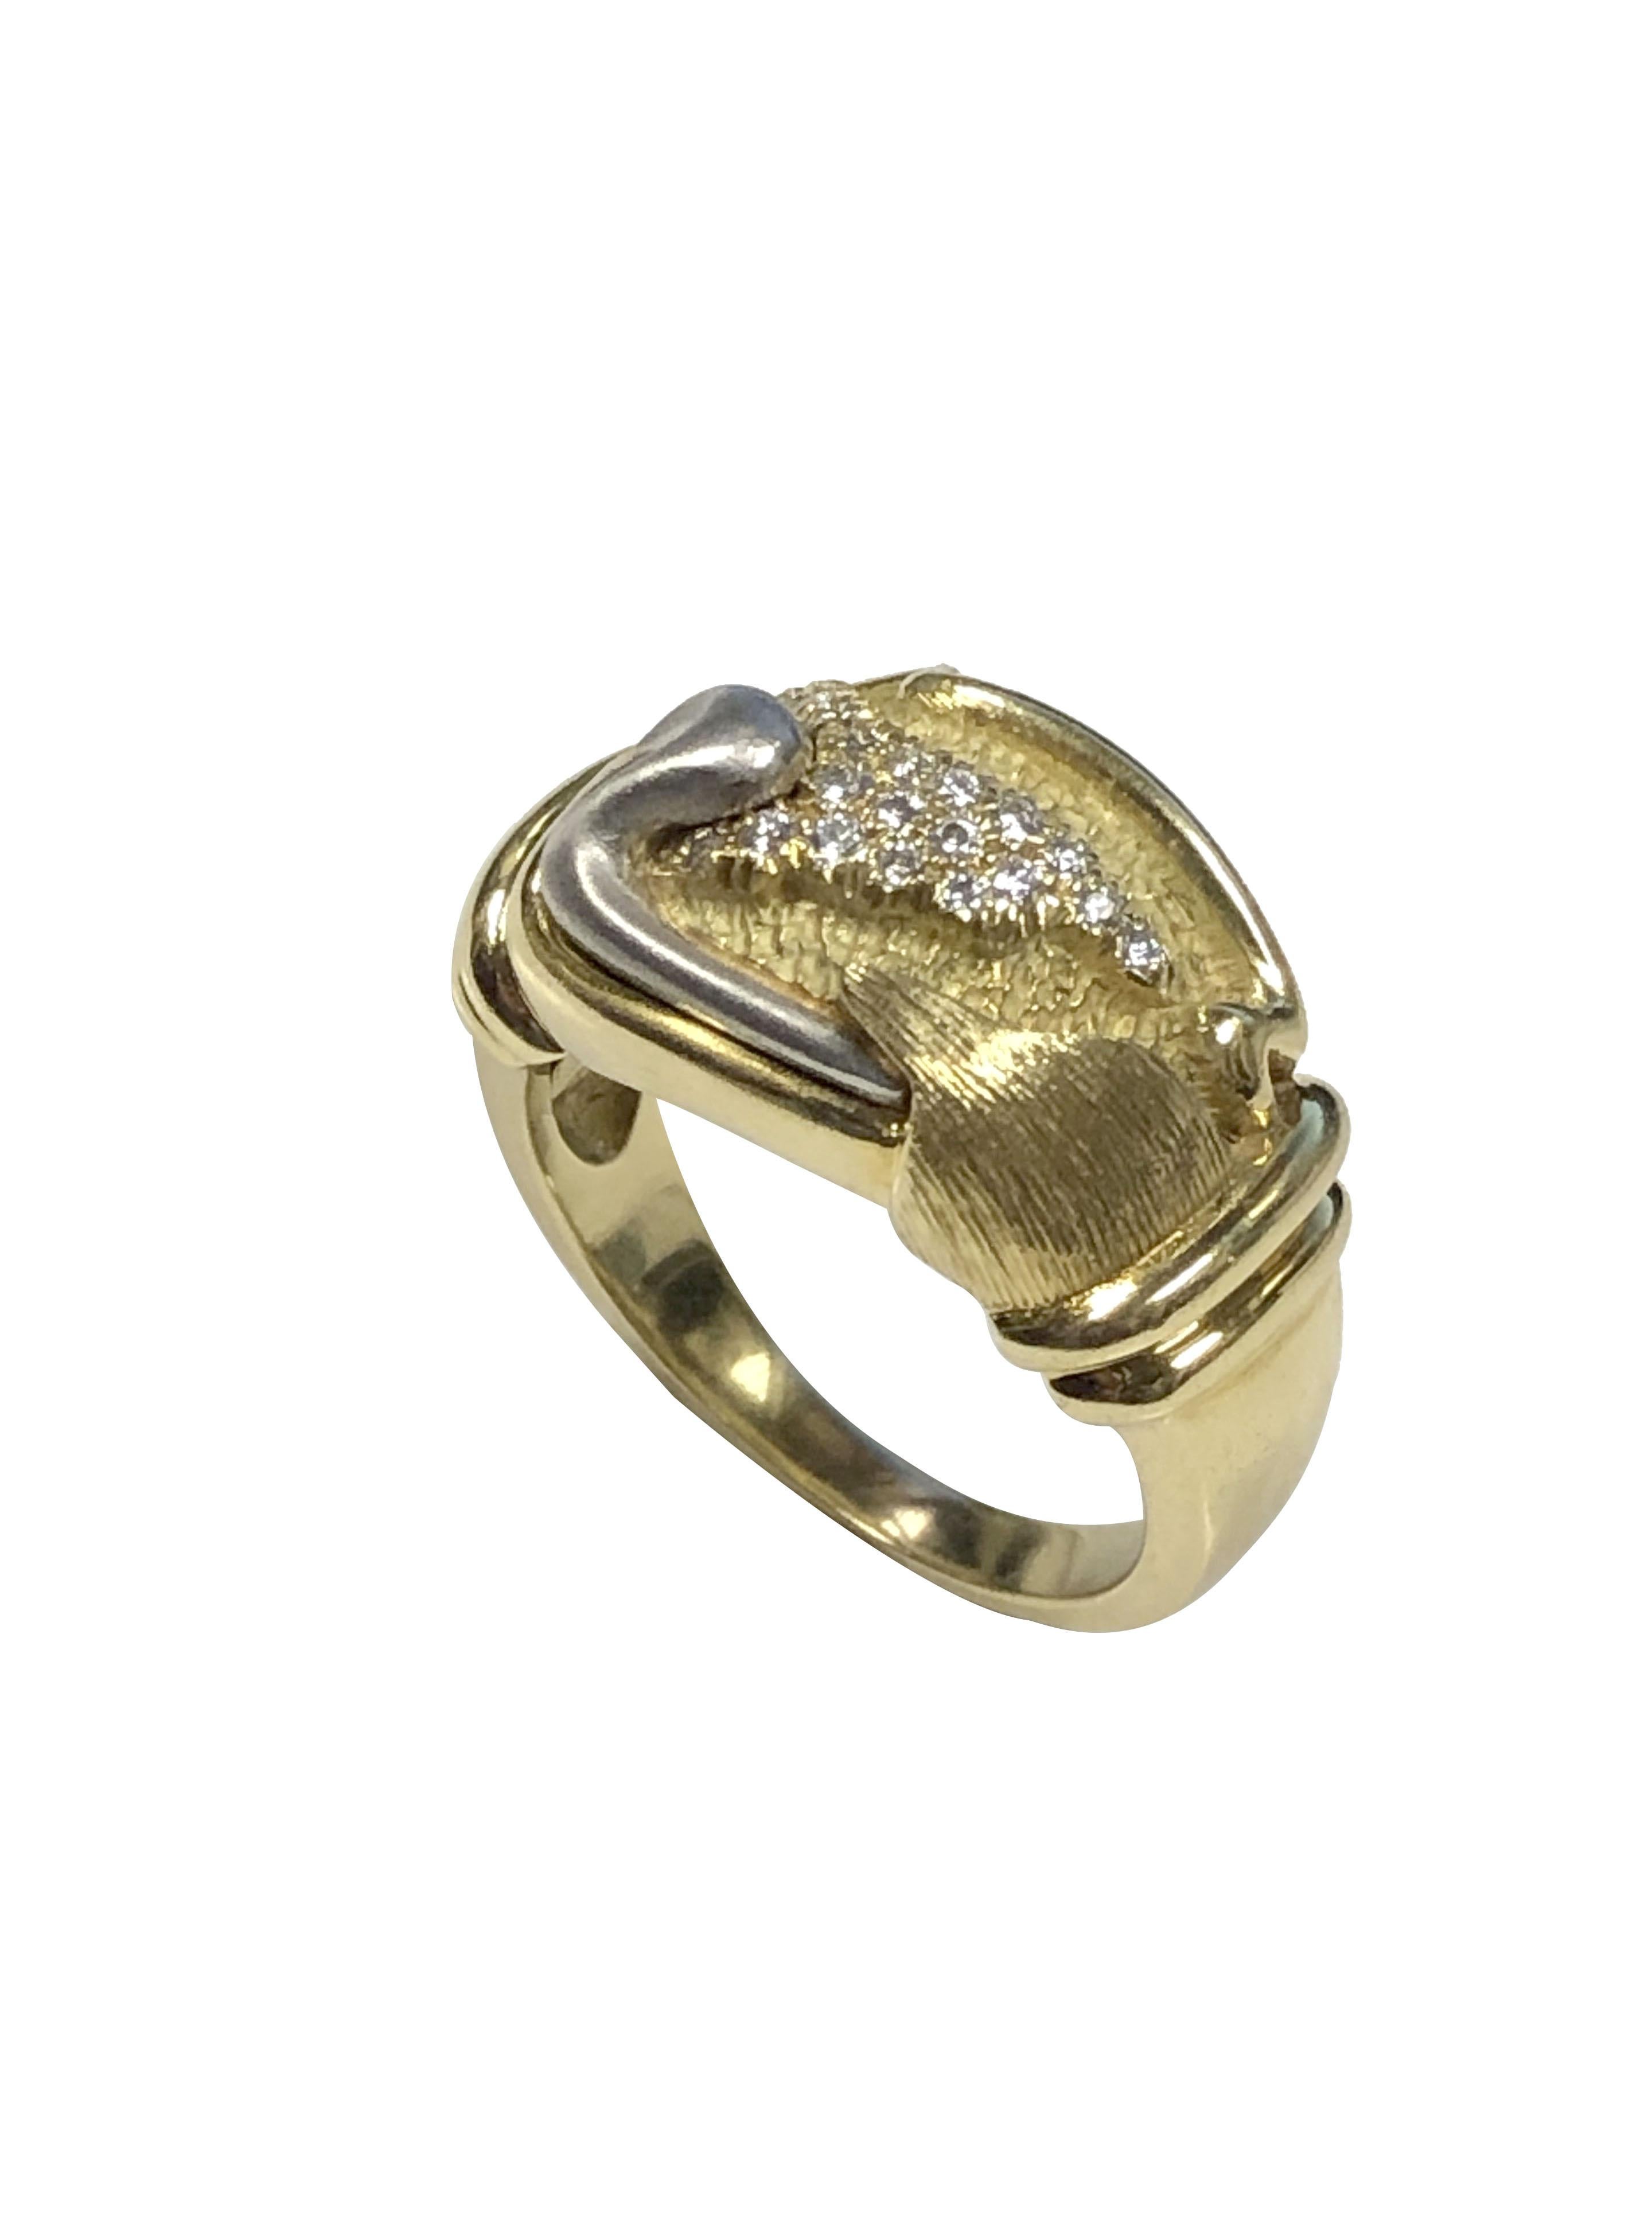 Circa 2000 Henry Dunay 18k Yellow Gold and Platinum Ring, having a free form flowing design the top of the ring measures 7/8 x 1/2 inch and weighs 11 Grams. Nice Sold construction with hand worked detailing and set with numerous Round Brilliant cut